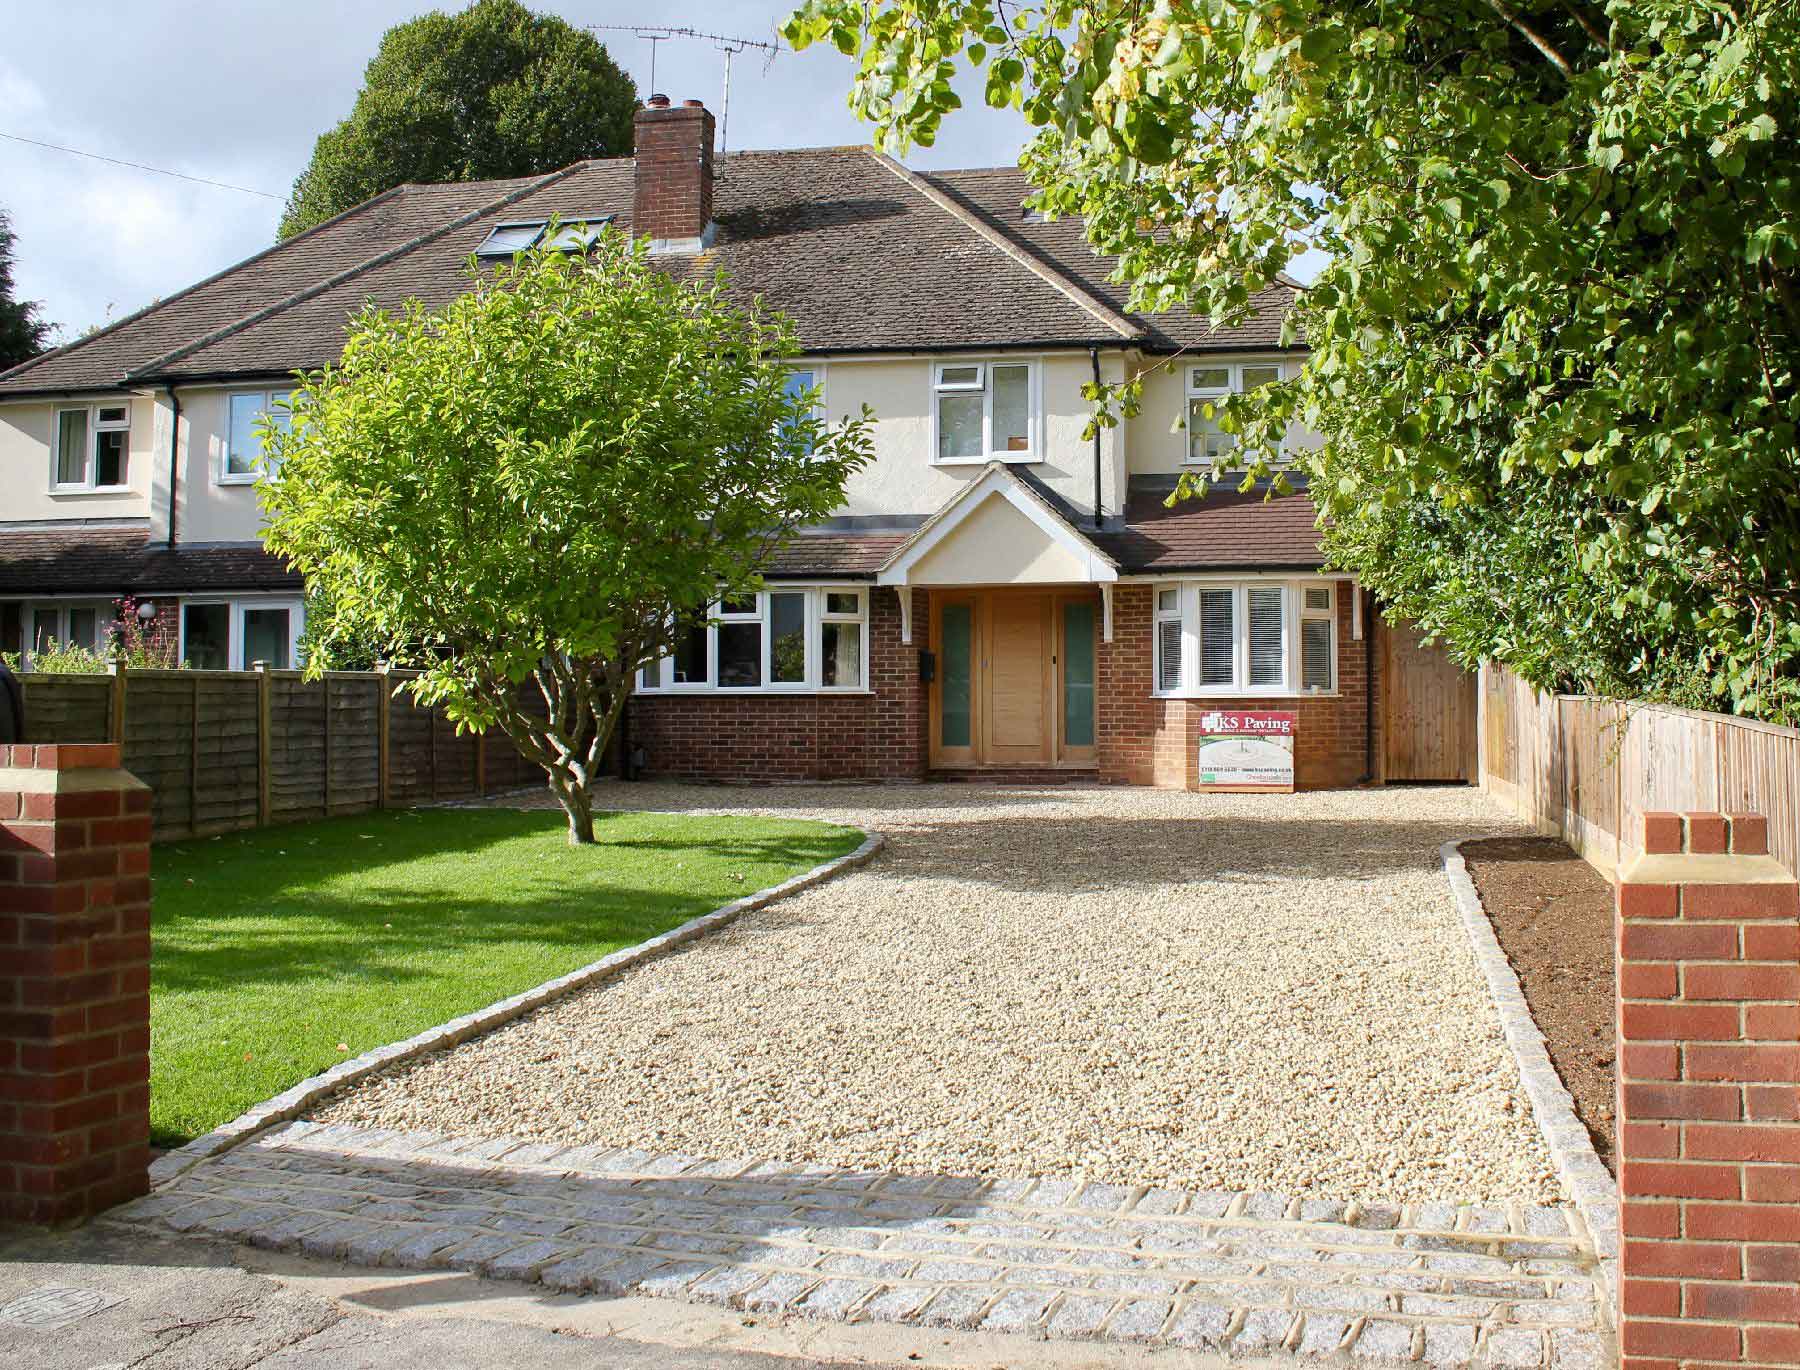 What is the Best Surface For My Patio? Block Paving Or Paving Stones (Flagging)